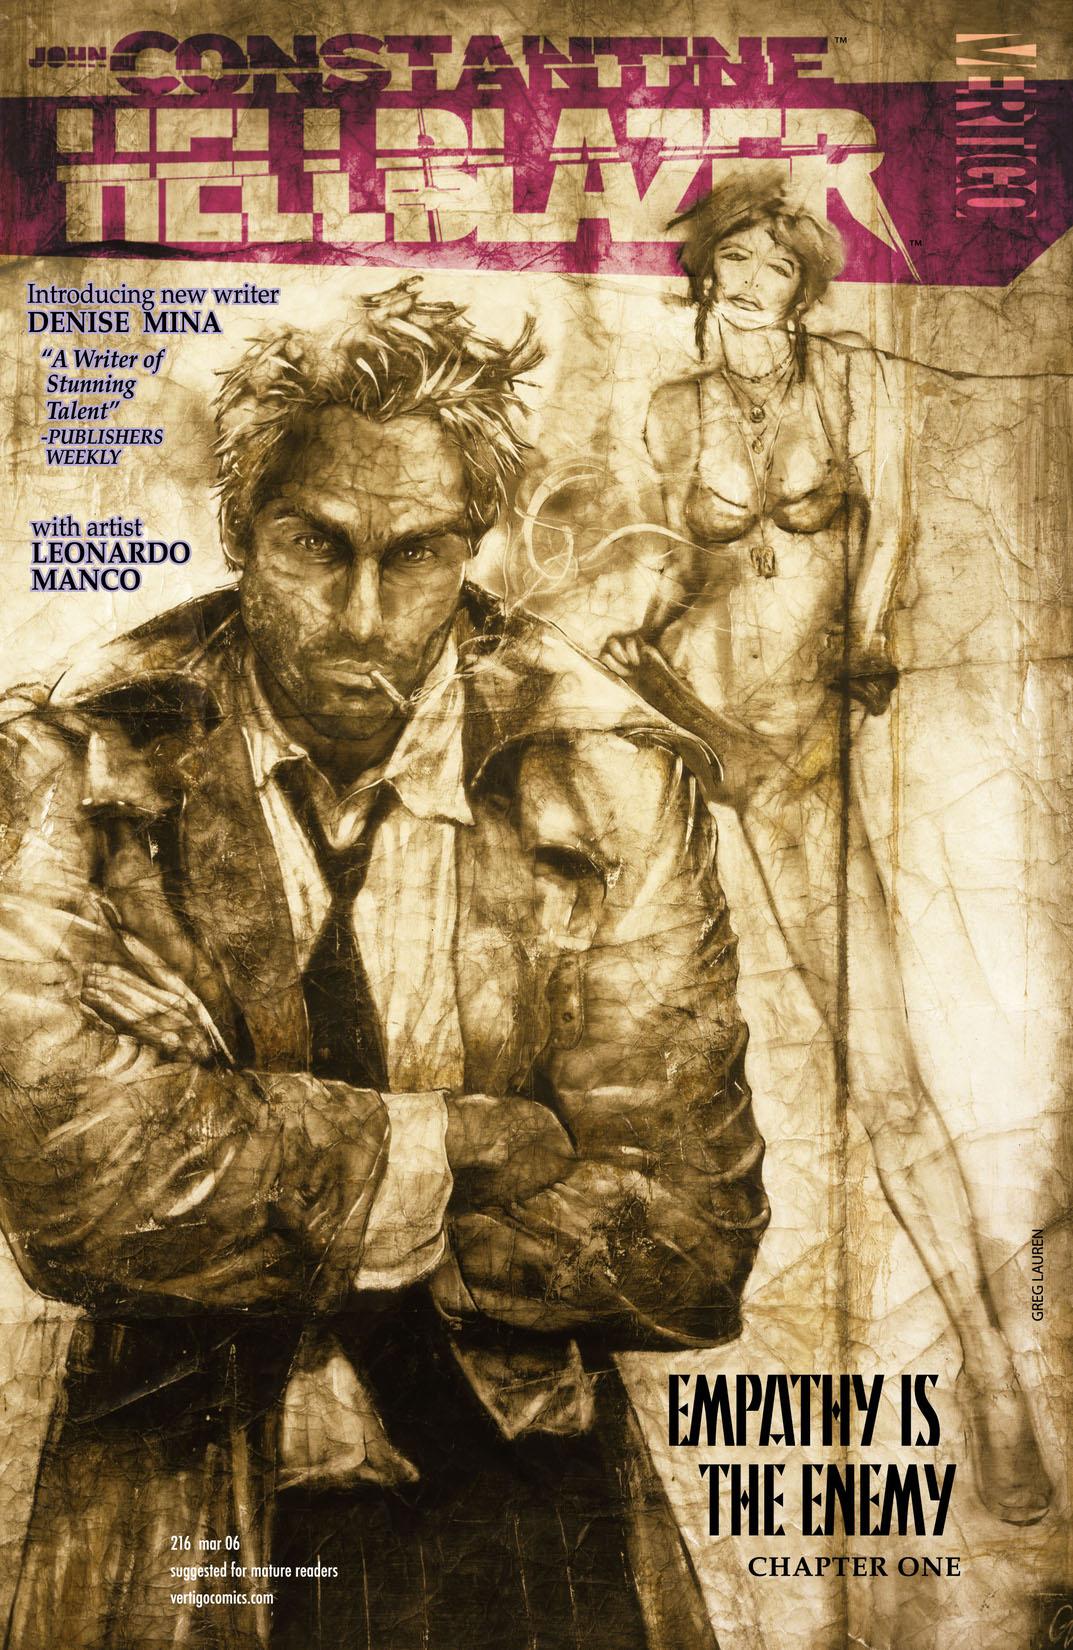 Hellblazer #216 preview images